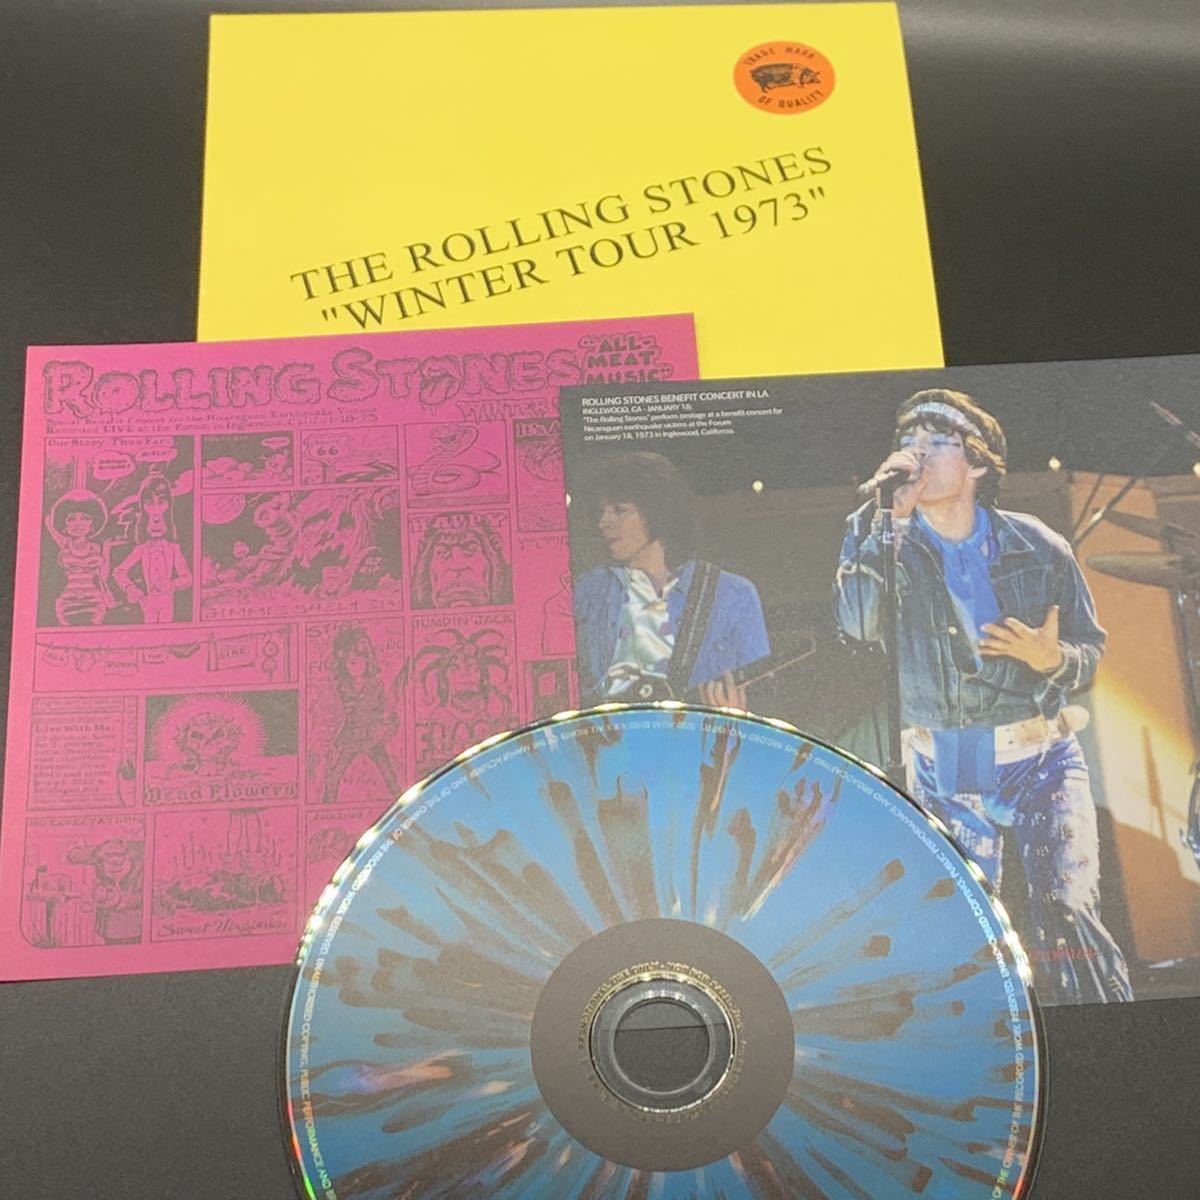 THE ROLLING STONES : WINTER TOUR 1973 「オール・ミート・ミュージック」 1CD 工場プレス銀盤CD ■欧米輸入限定盤■限定100セット 残少！_画像5